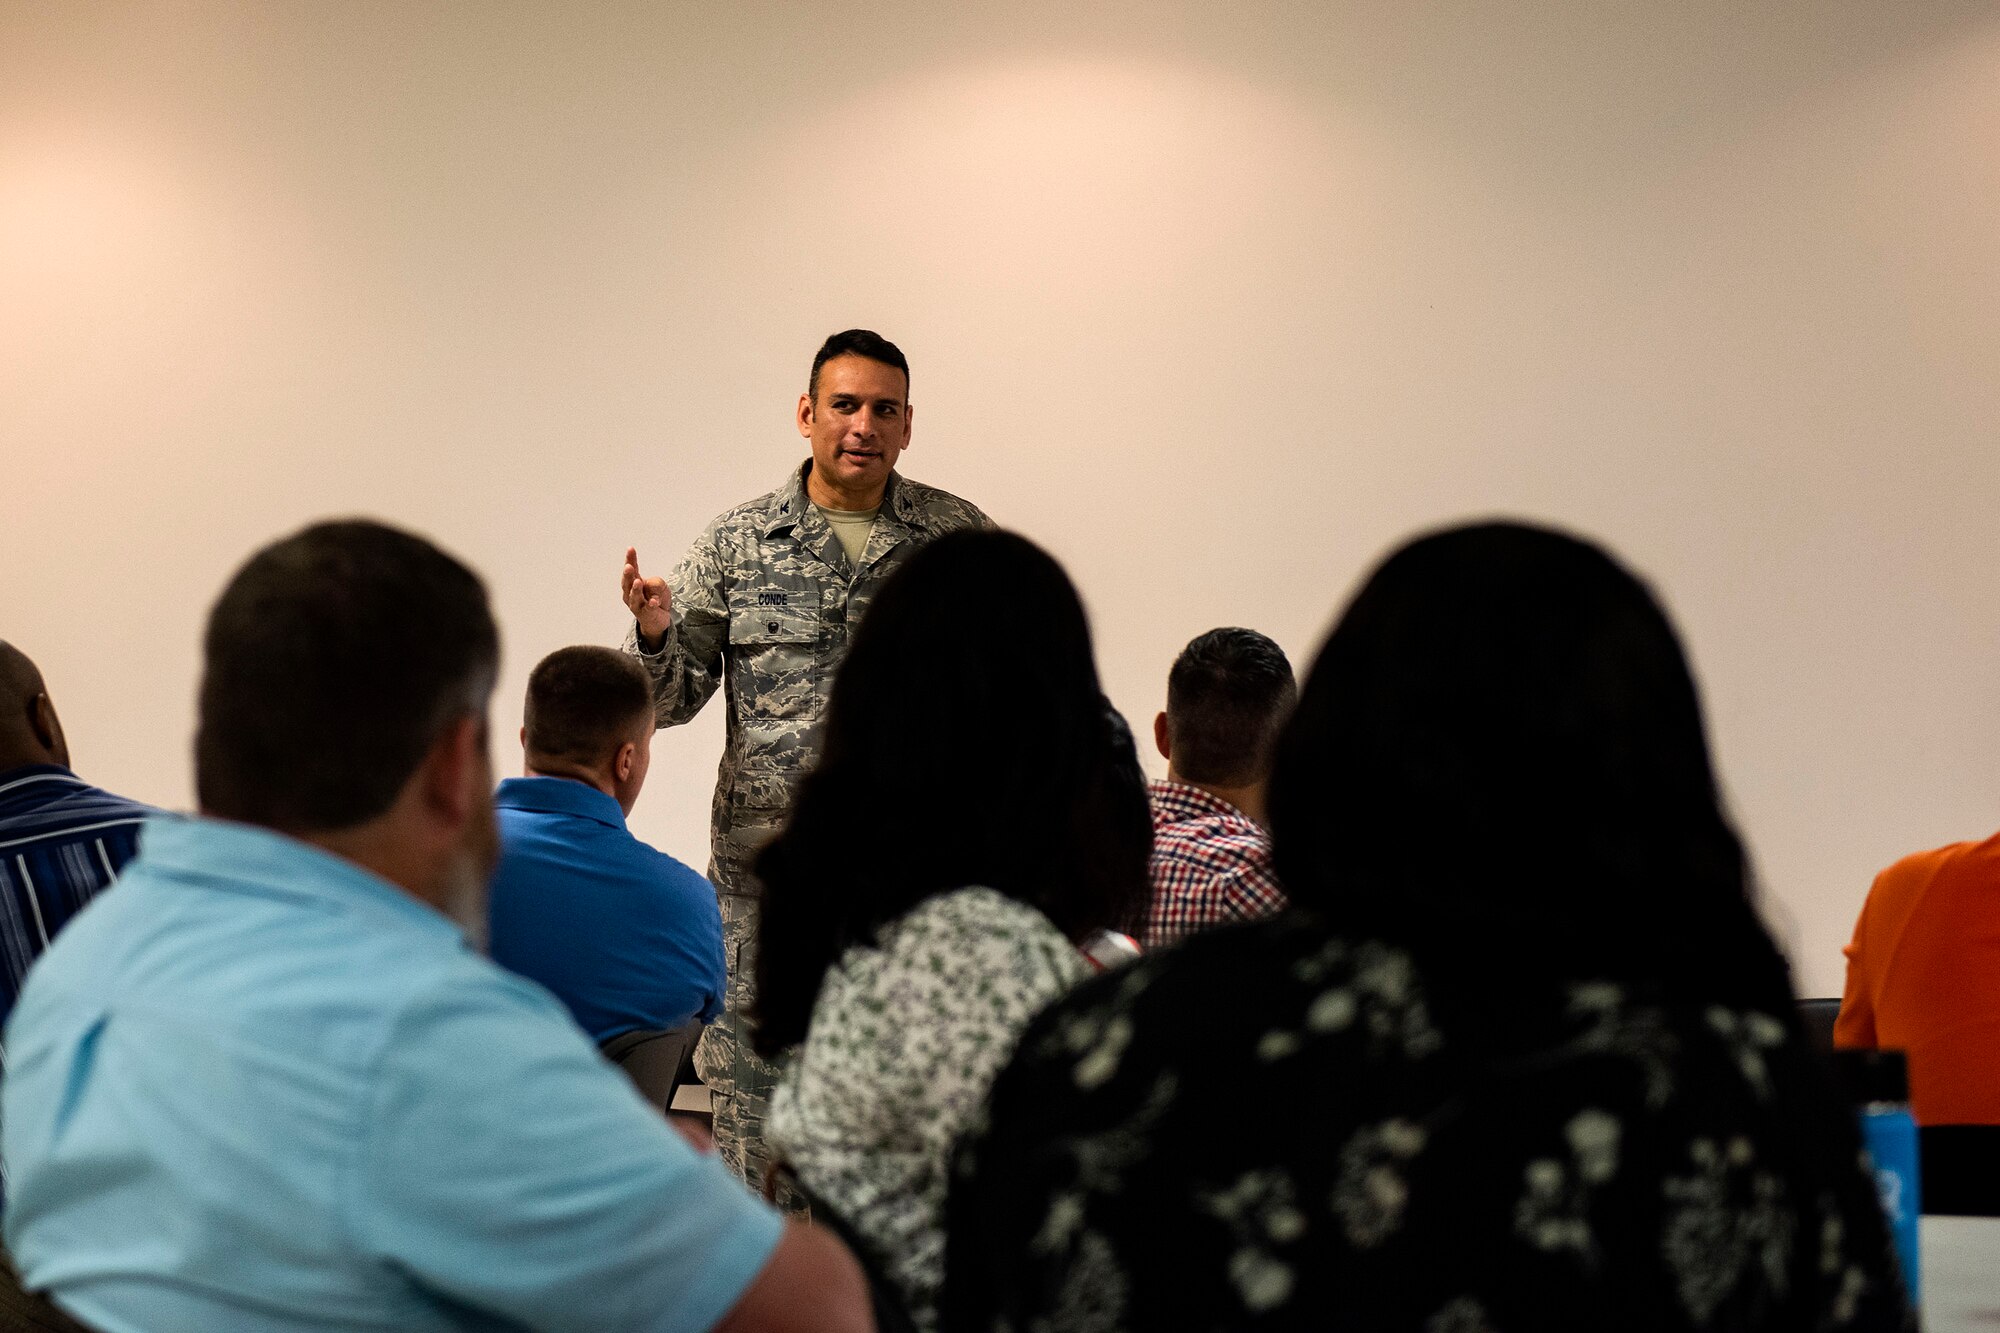 Col. Benjamin Conde, 23d Wing vice commander, gives remarks during a National Security Innovation Network “Innovation Bootcamp” course, July 23, 2019, at Moody Air Force Base, Ga. Over the four-day bootcamp, 29 Airmen learned how to apply innovative solutions to Moody specific challenges under guidance of a team from the University of California, Berkeley. (U.S. Air Force photo by Senior Airman Erick Requadt)